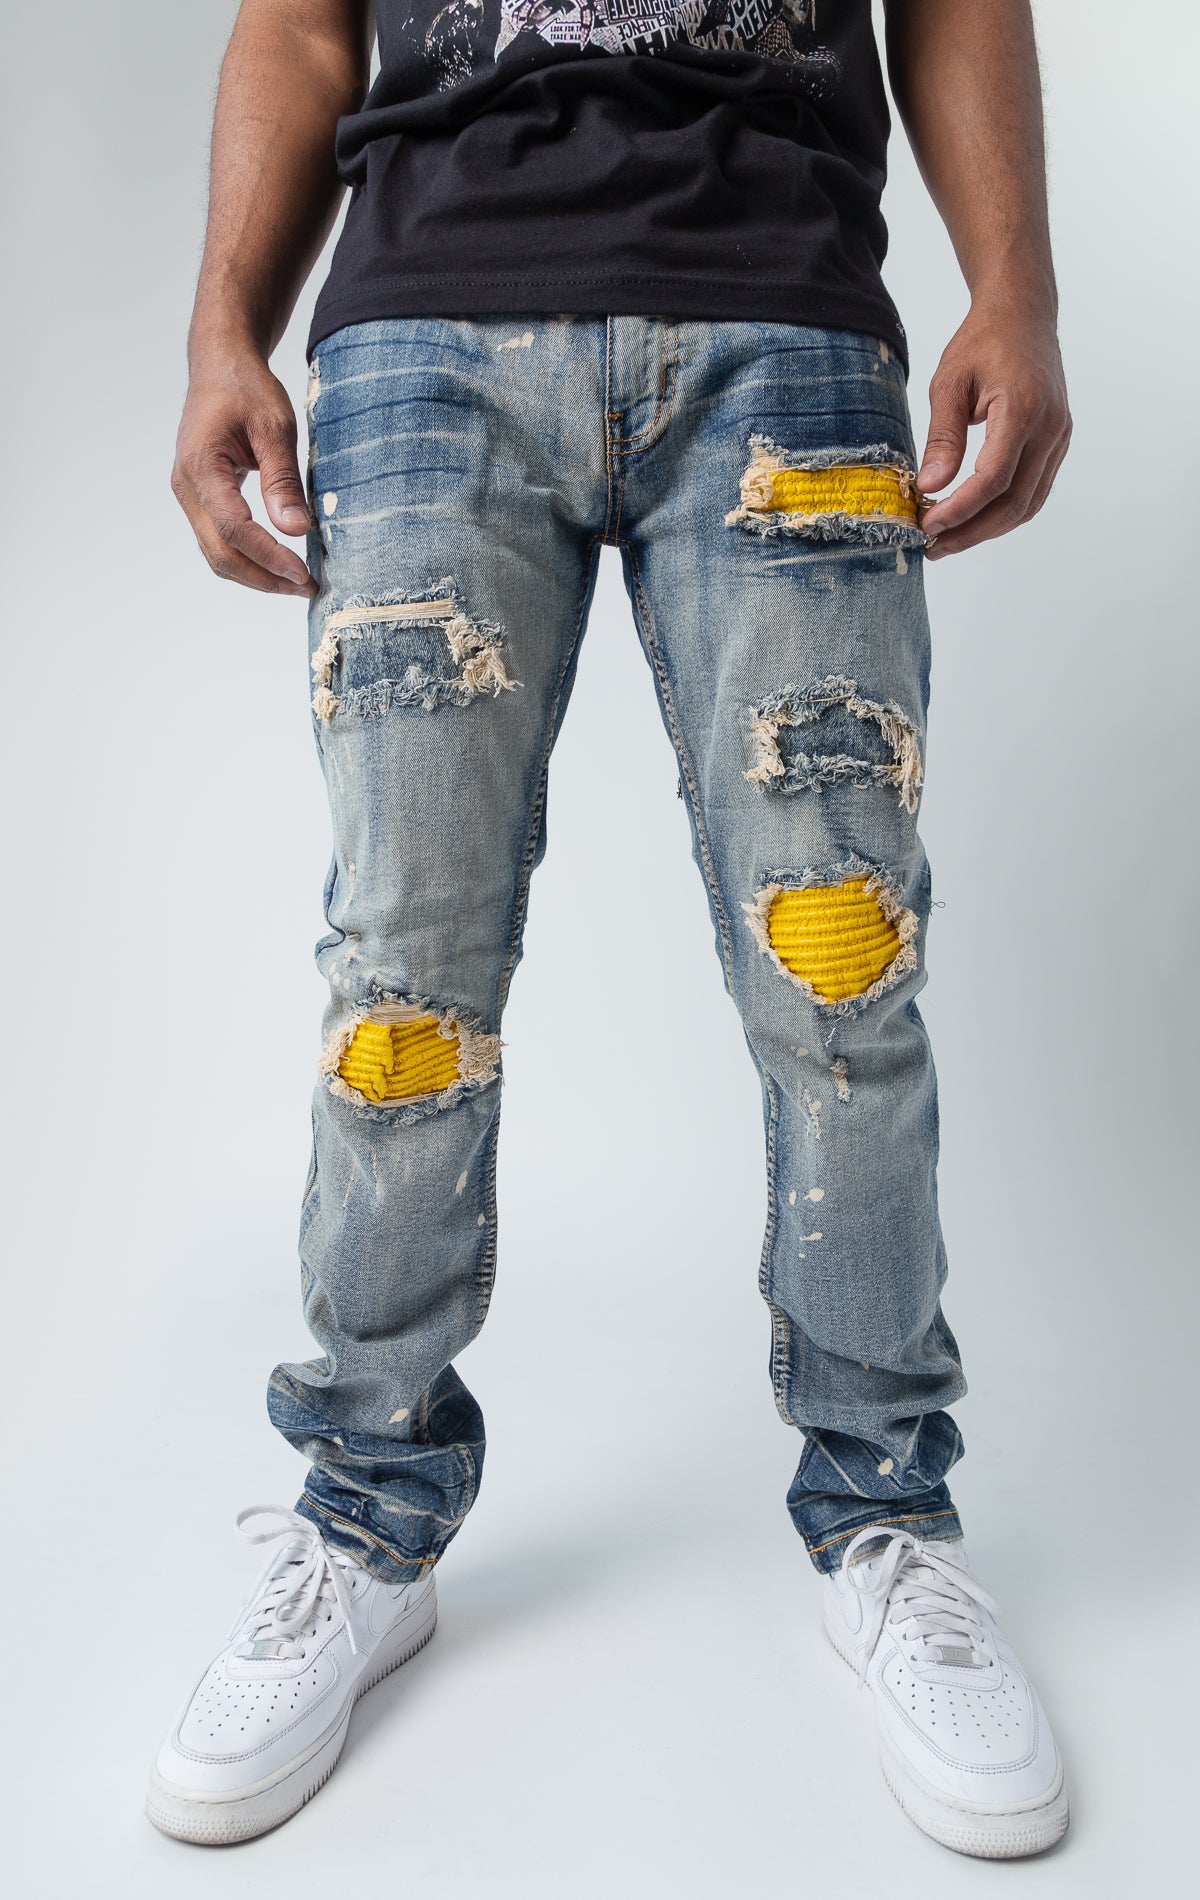 Evolution teared denim pants in lt tint and yellow